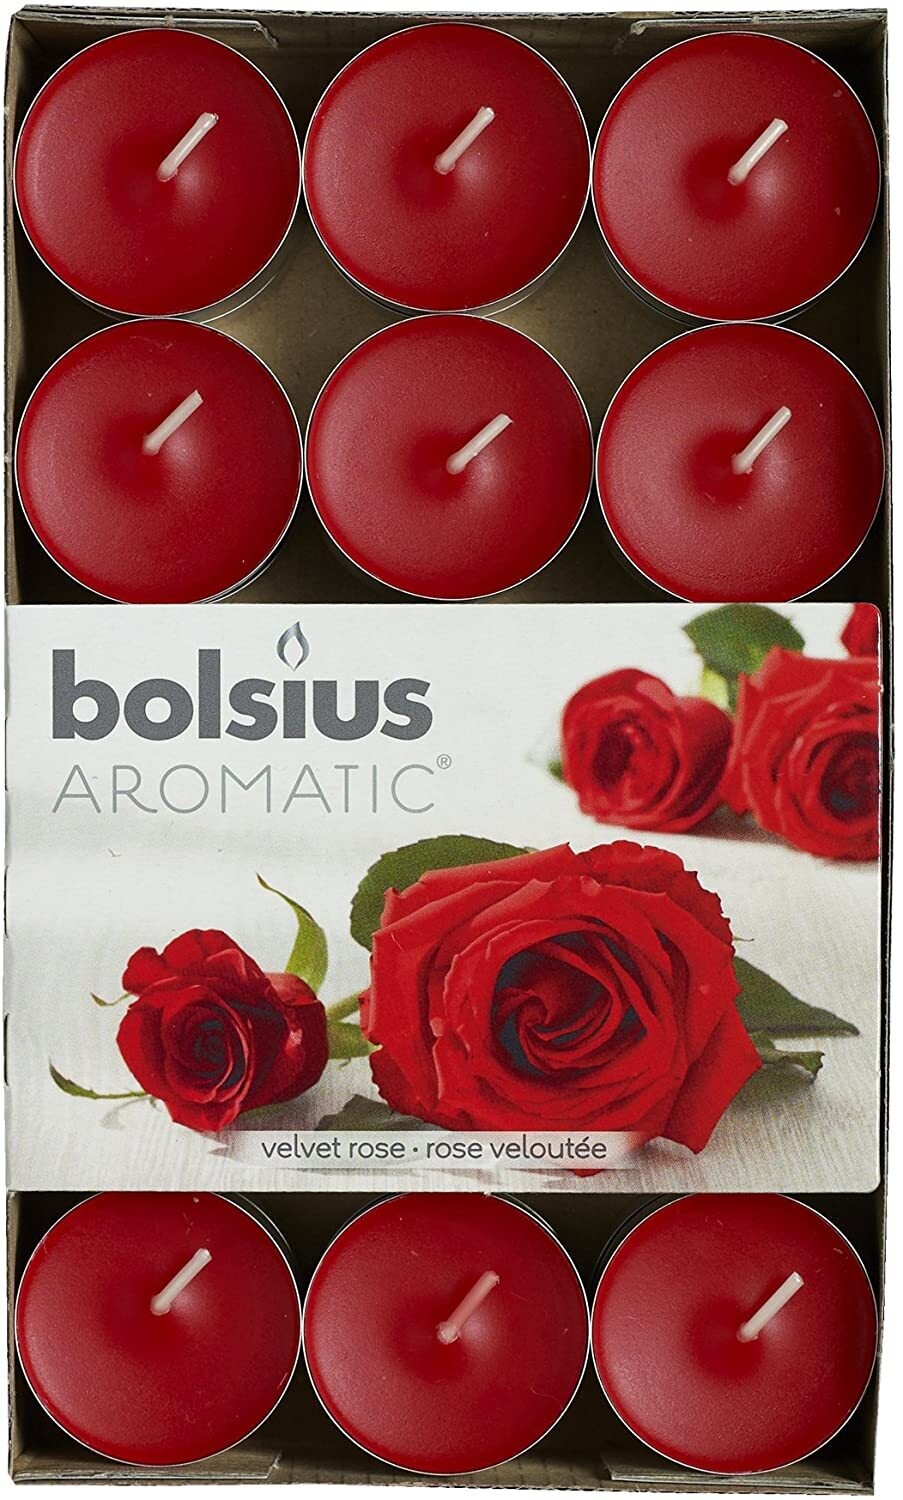 Bolsius Aromatic Scented Tea Lights 30 Pack 1.42 x 4.84 x 7.95 inches